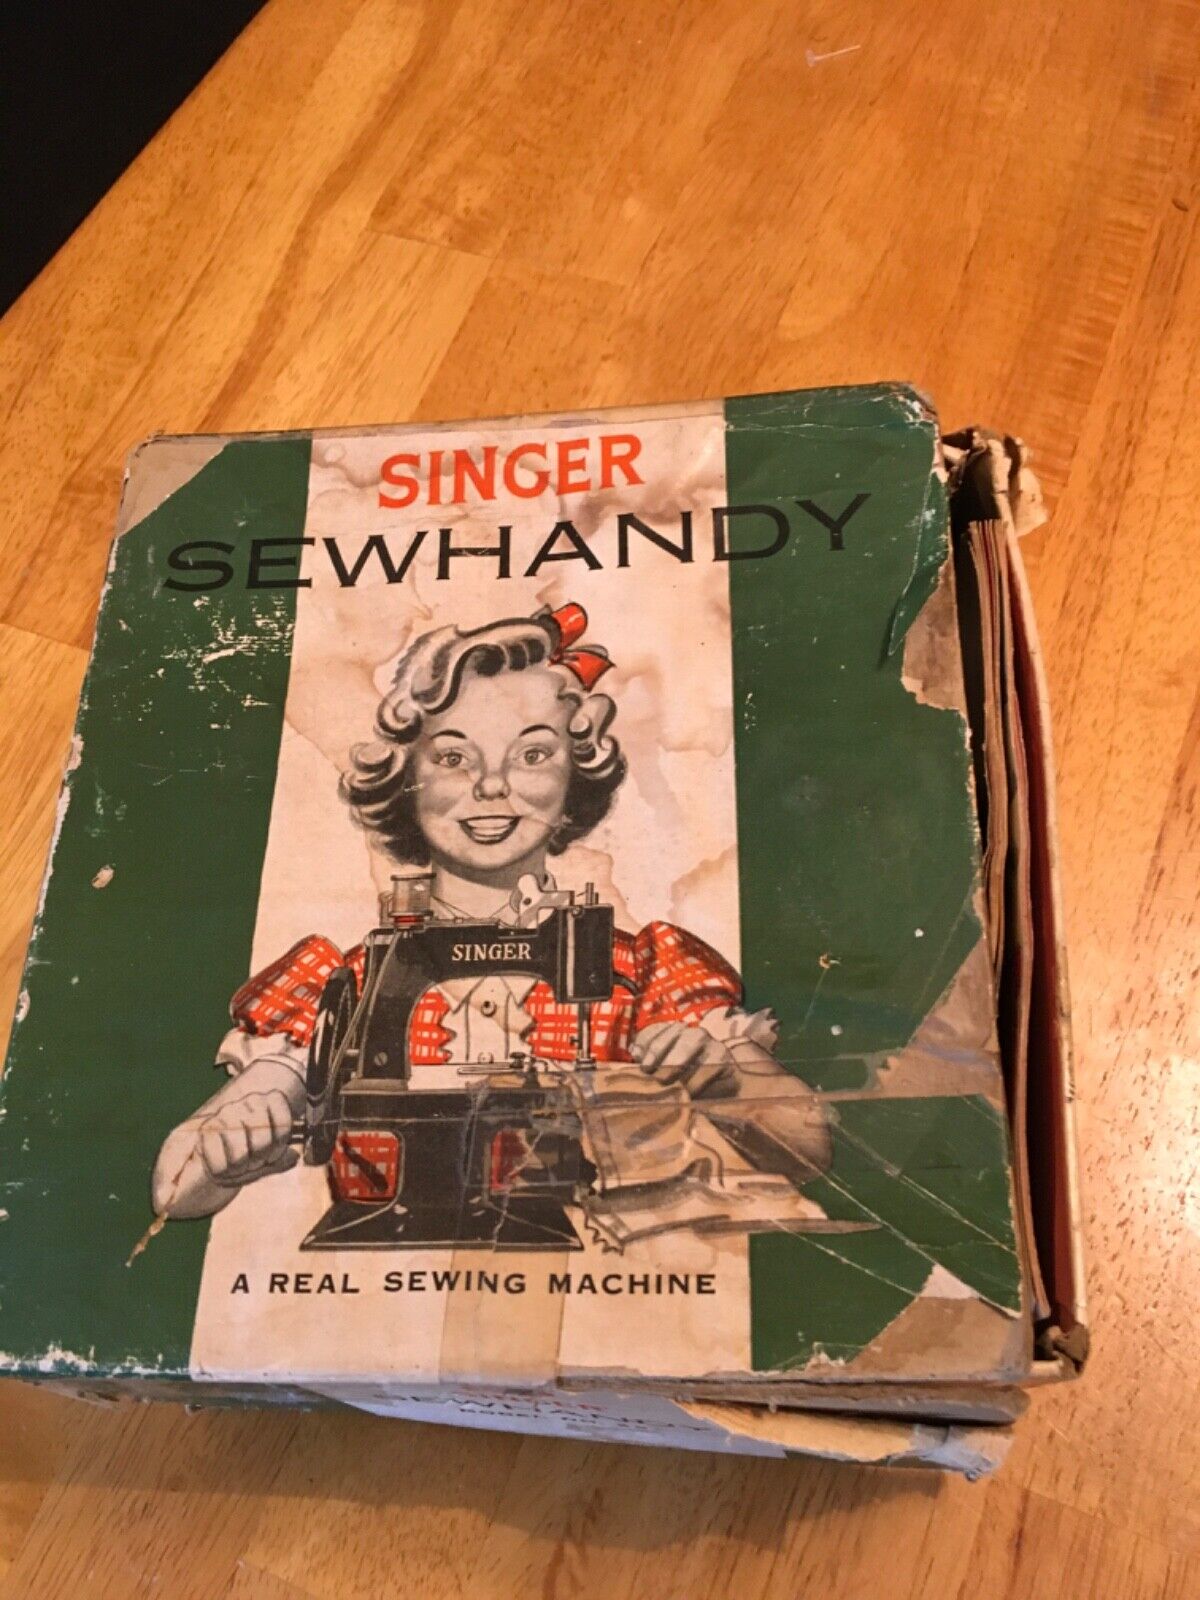 Vintage Singer Model 20 Sewhandy Child's Toy Hand Crank Sewing Machine